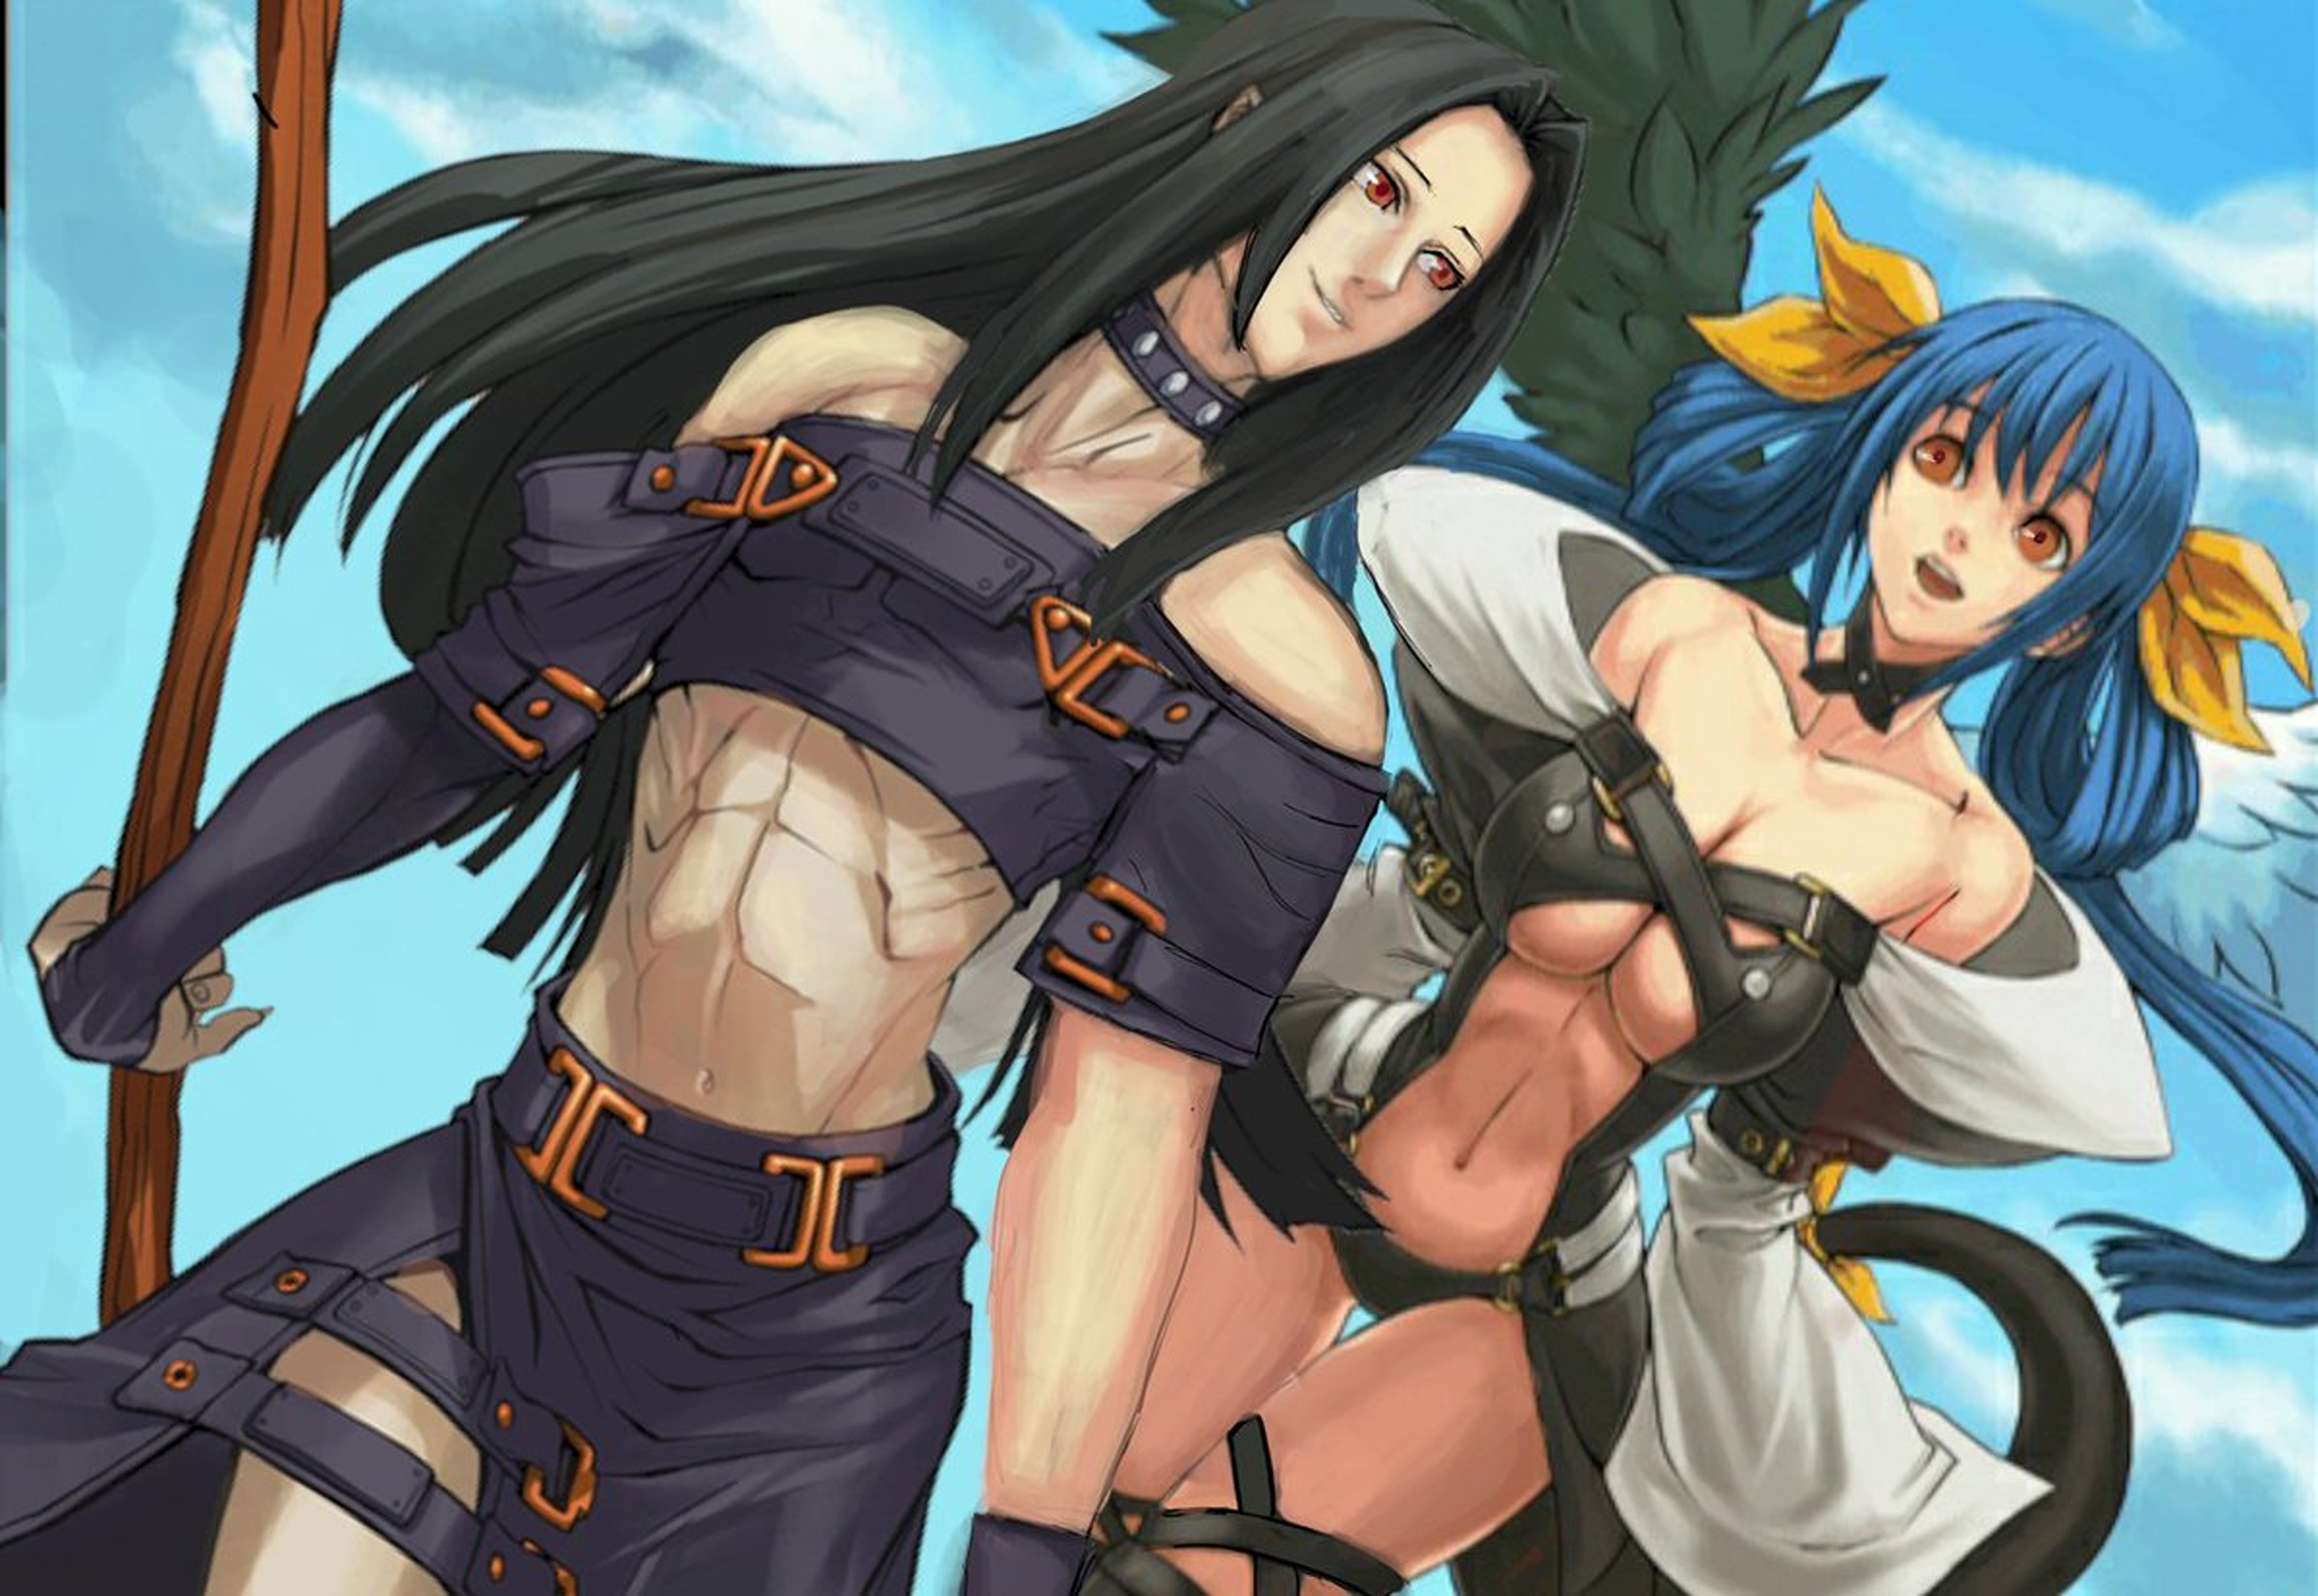 Guilty Gear XX Guilty Gear Anime Couple Anime Games Video Game Art Fighting Games Video Games Angel  2424x1669